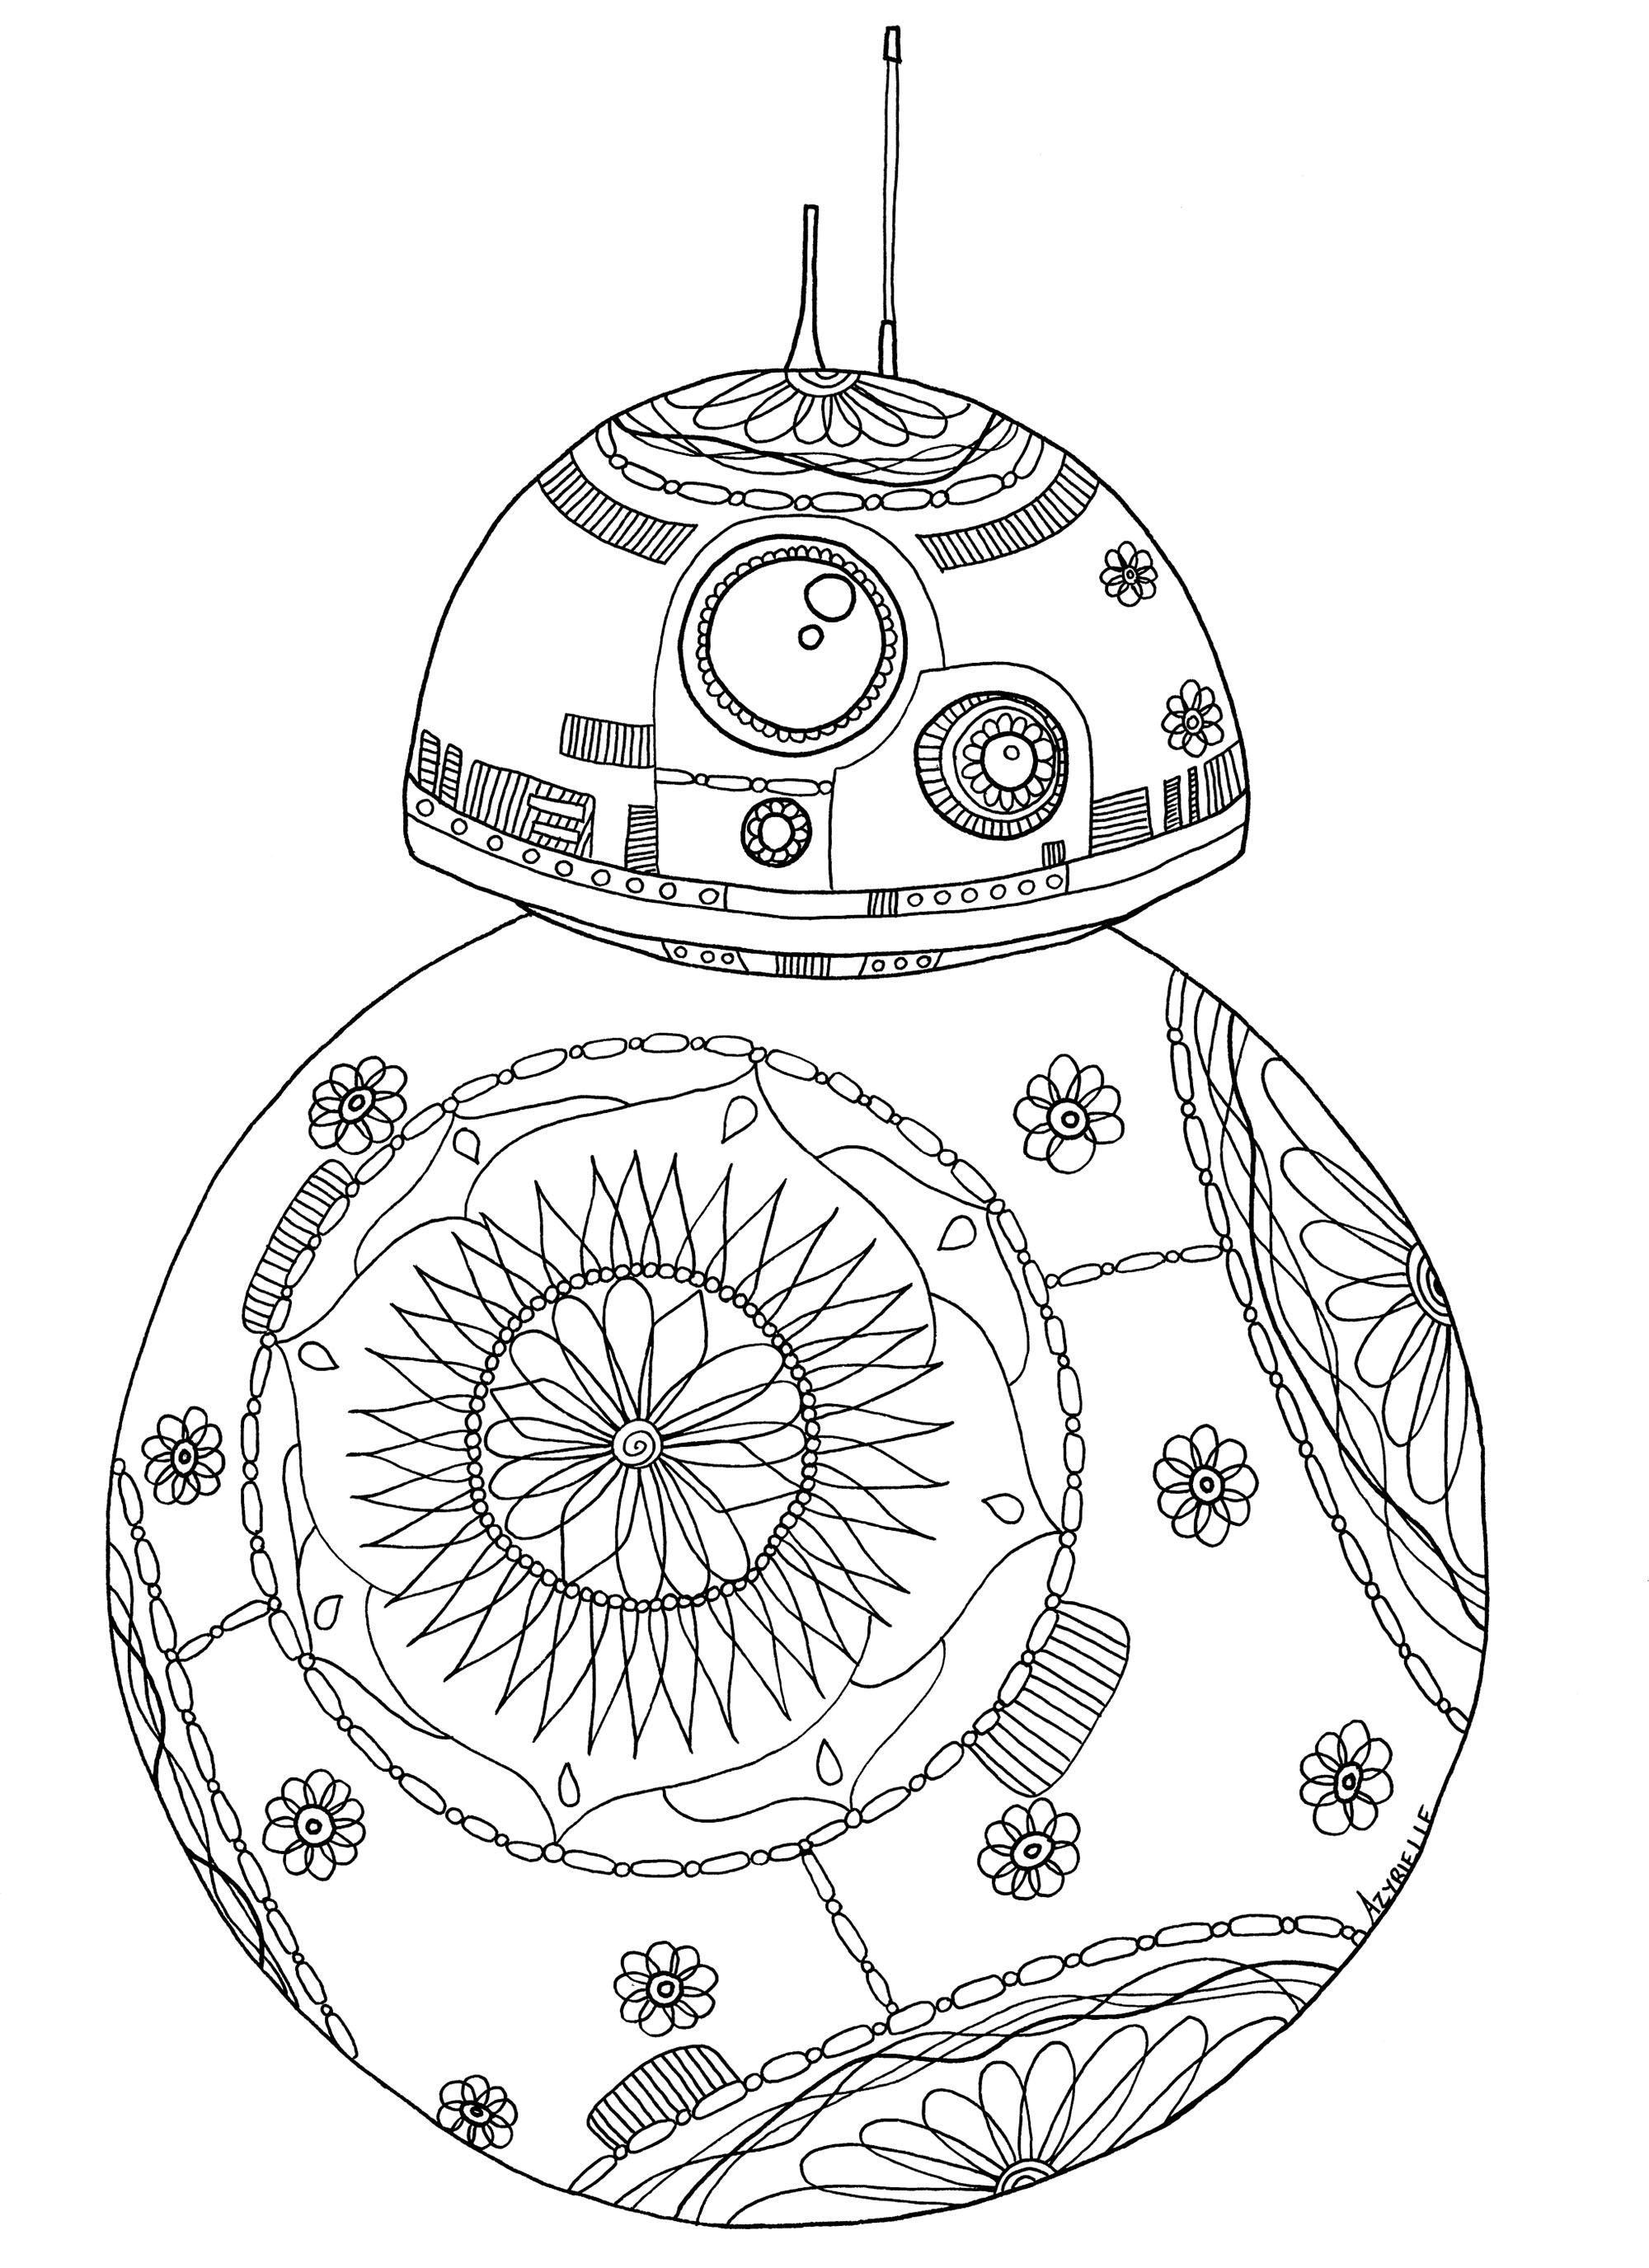 Star Wars Coloring Pages for Adults